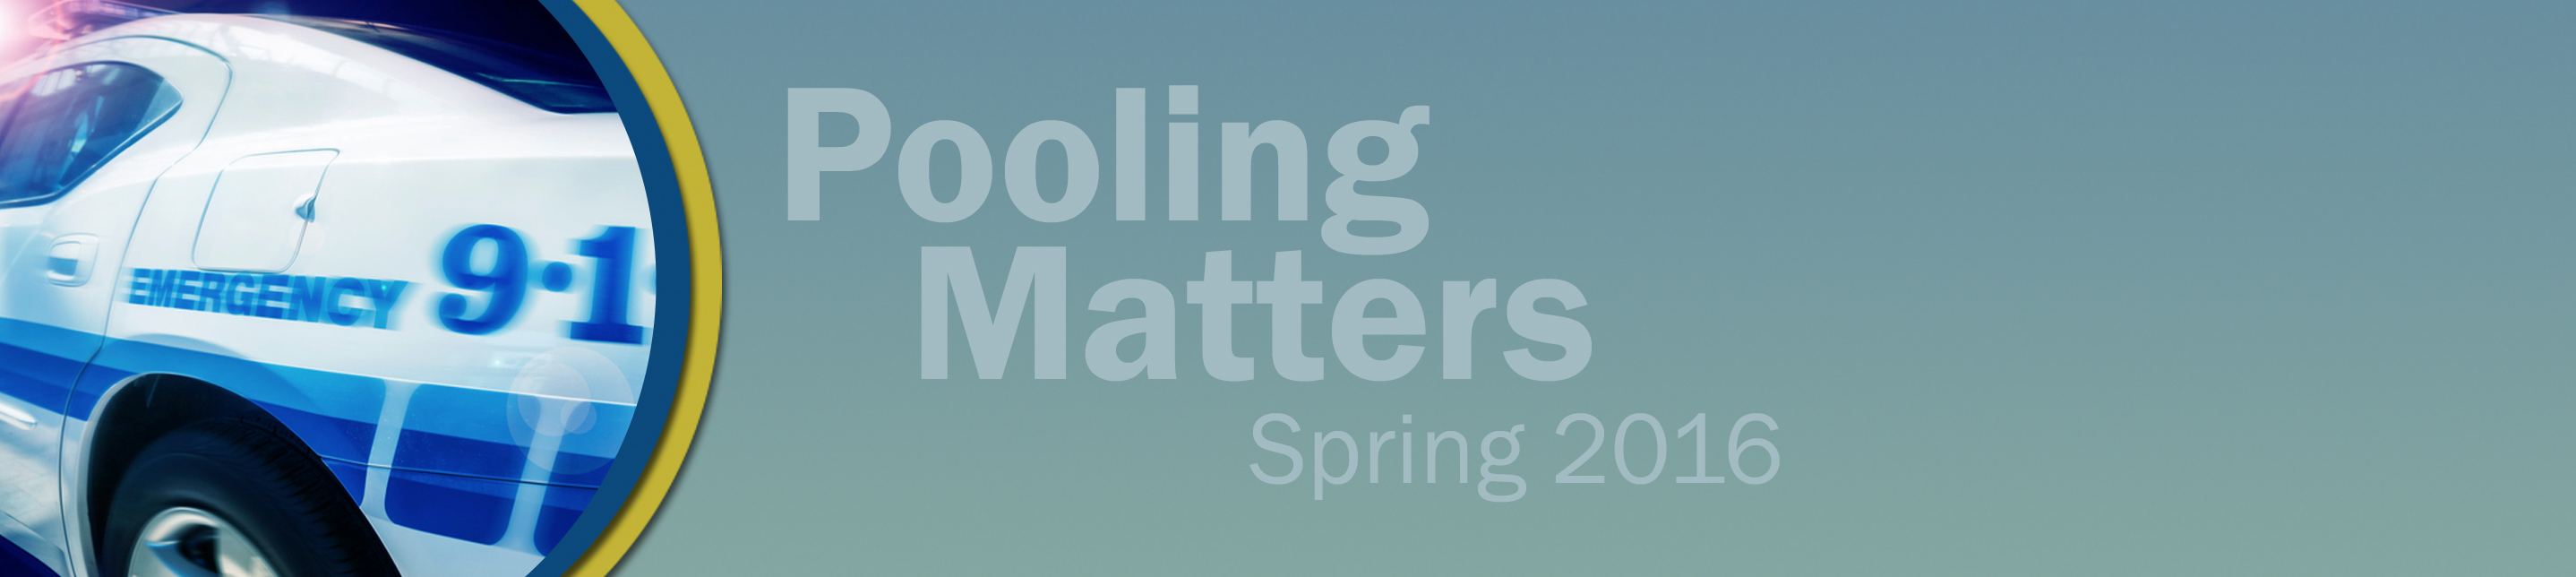 Pooling Matters: 2016 Spring Issue